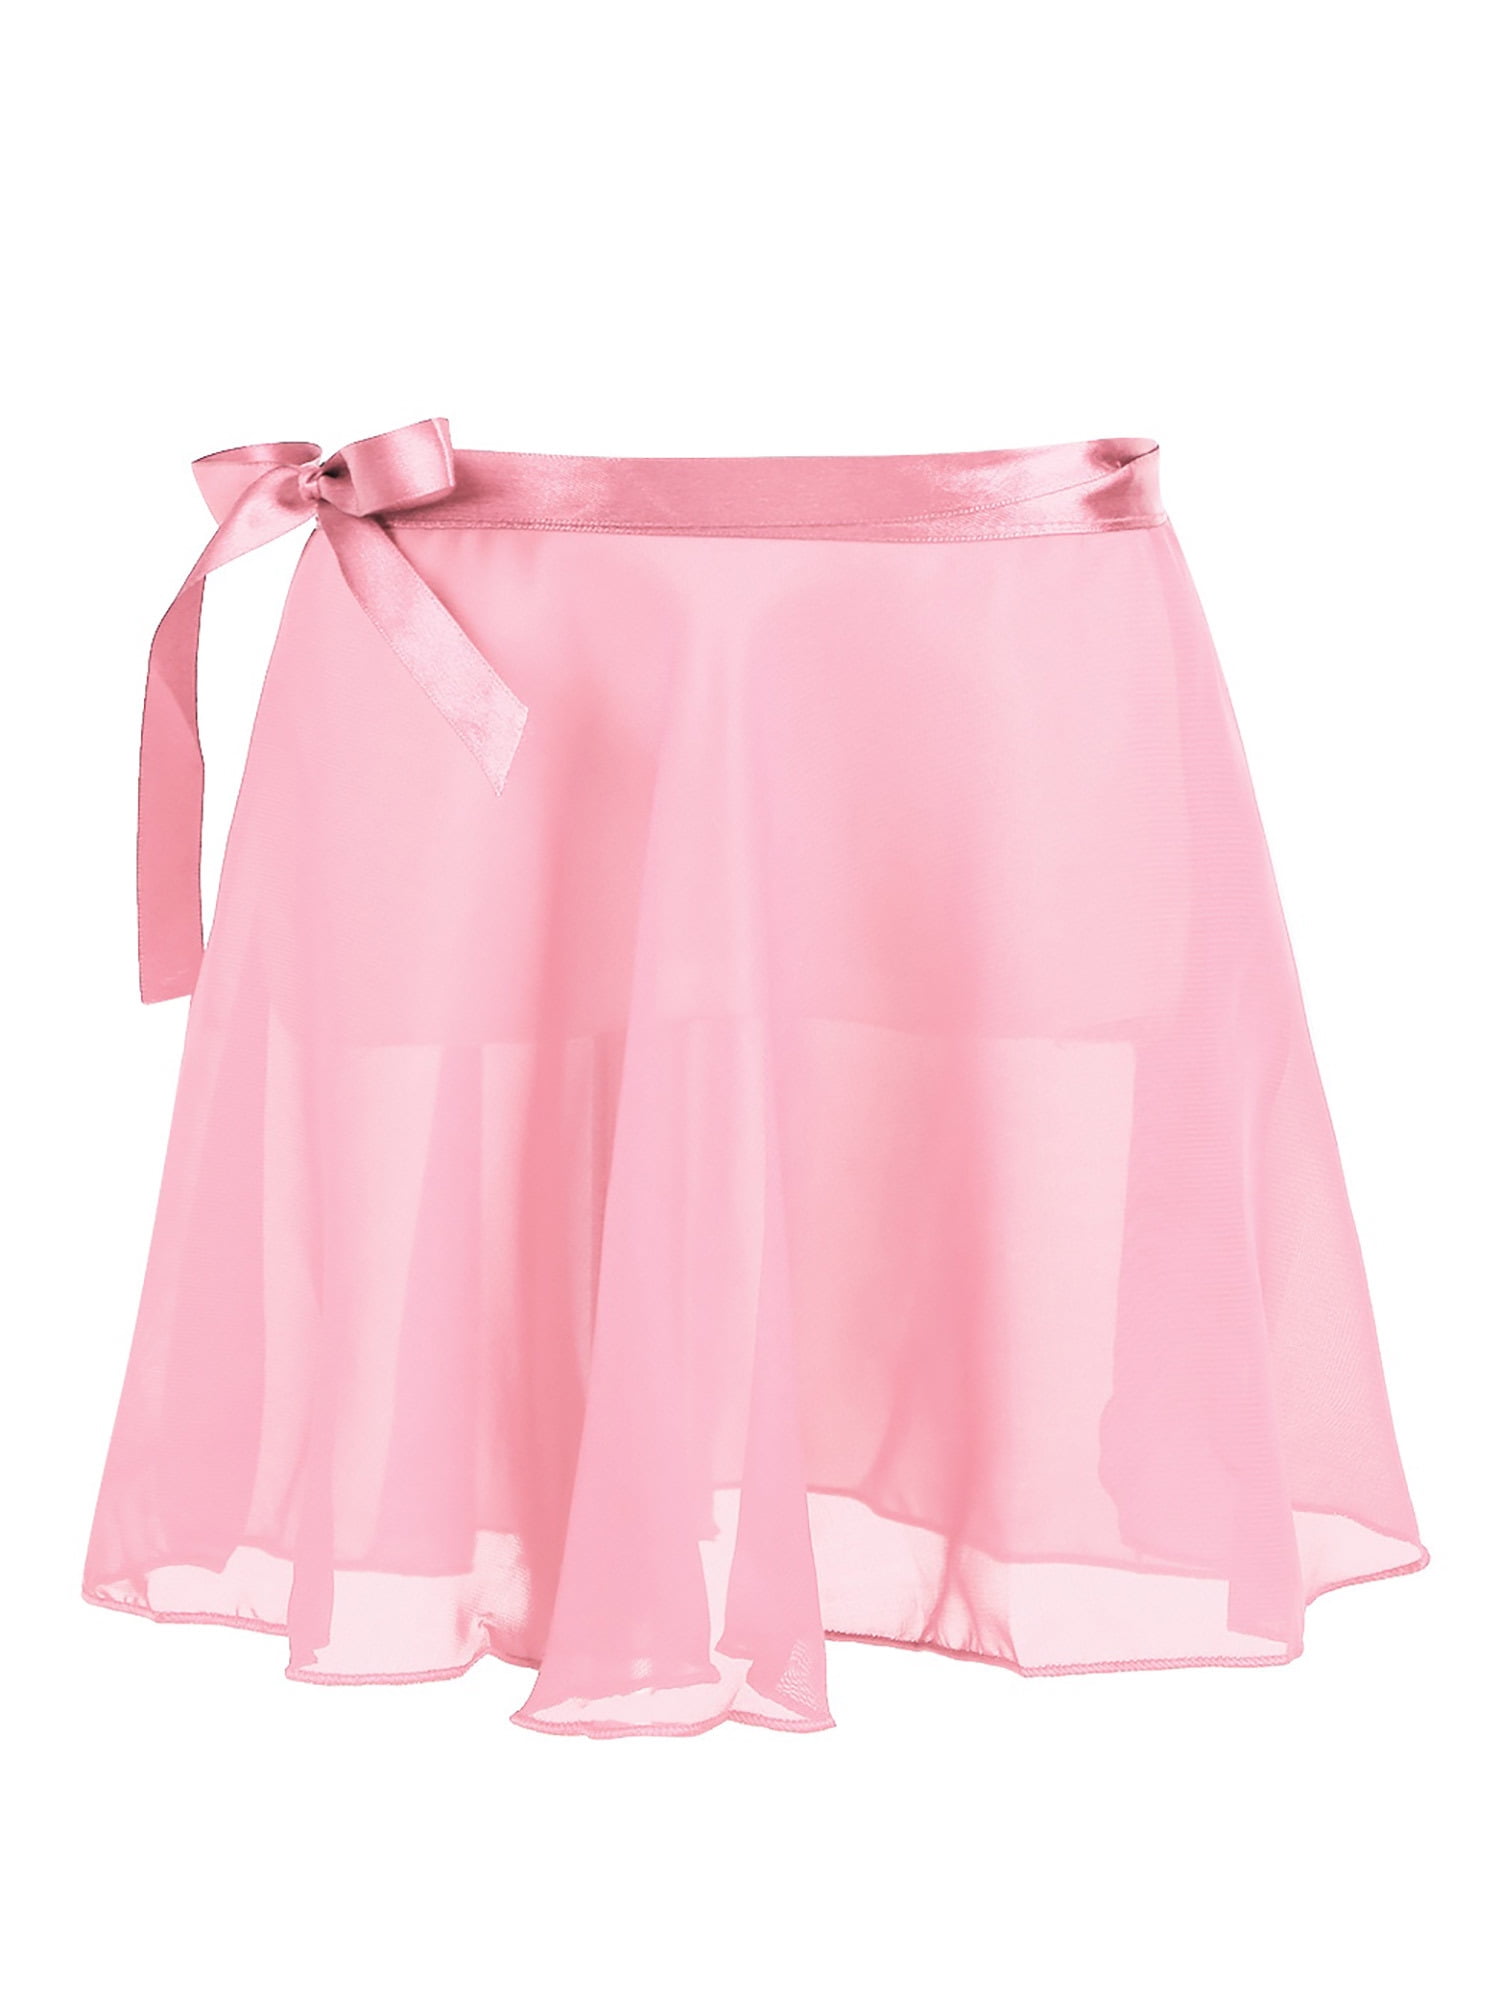 CHICTRY Childrens Girls Dance Sport Classics Chiffon Collection Wrap Over Skirt 